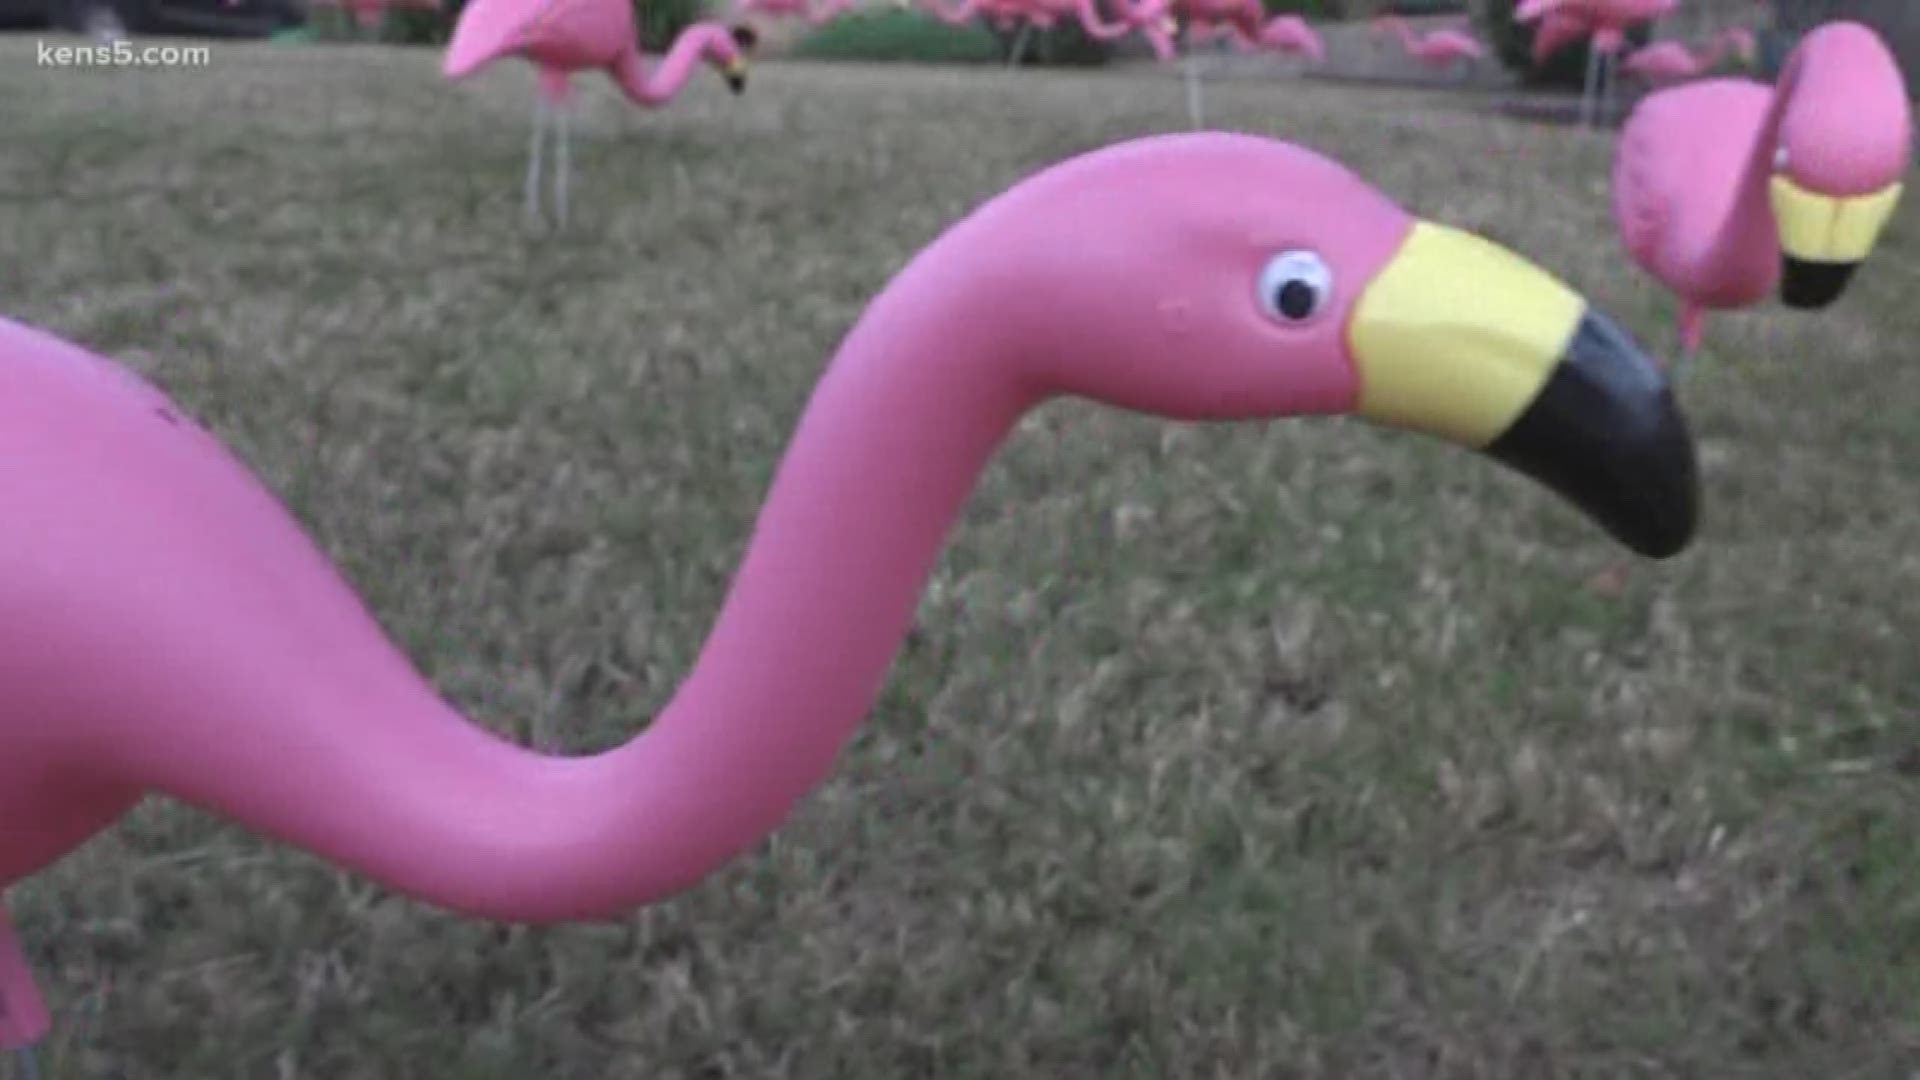 The pink pals are hanging out in front yards as a charitable fundraiser.